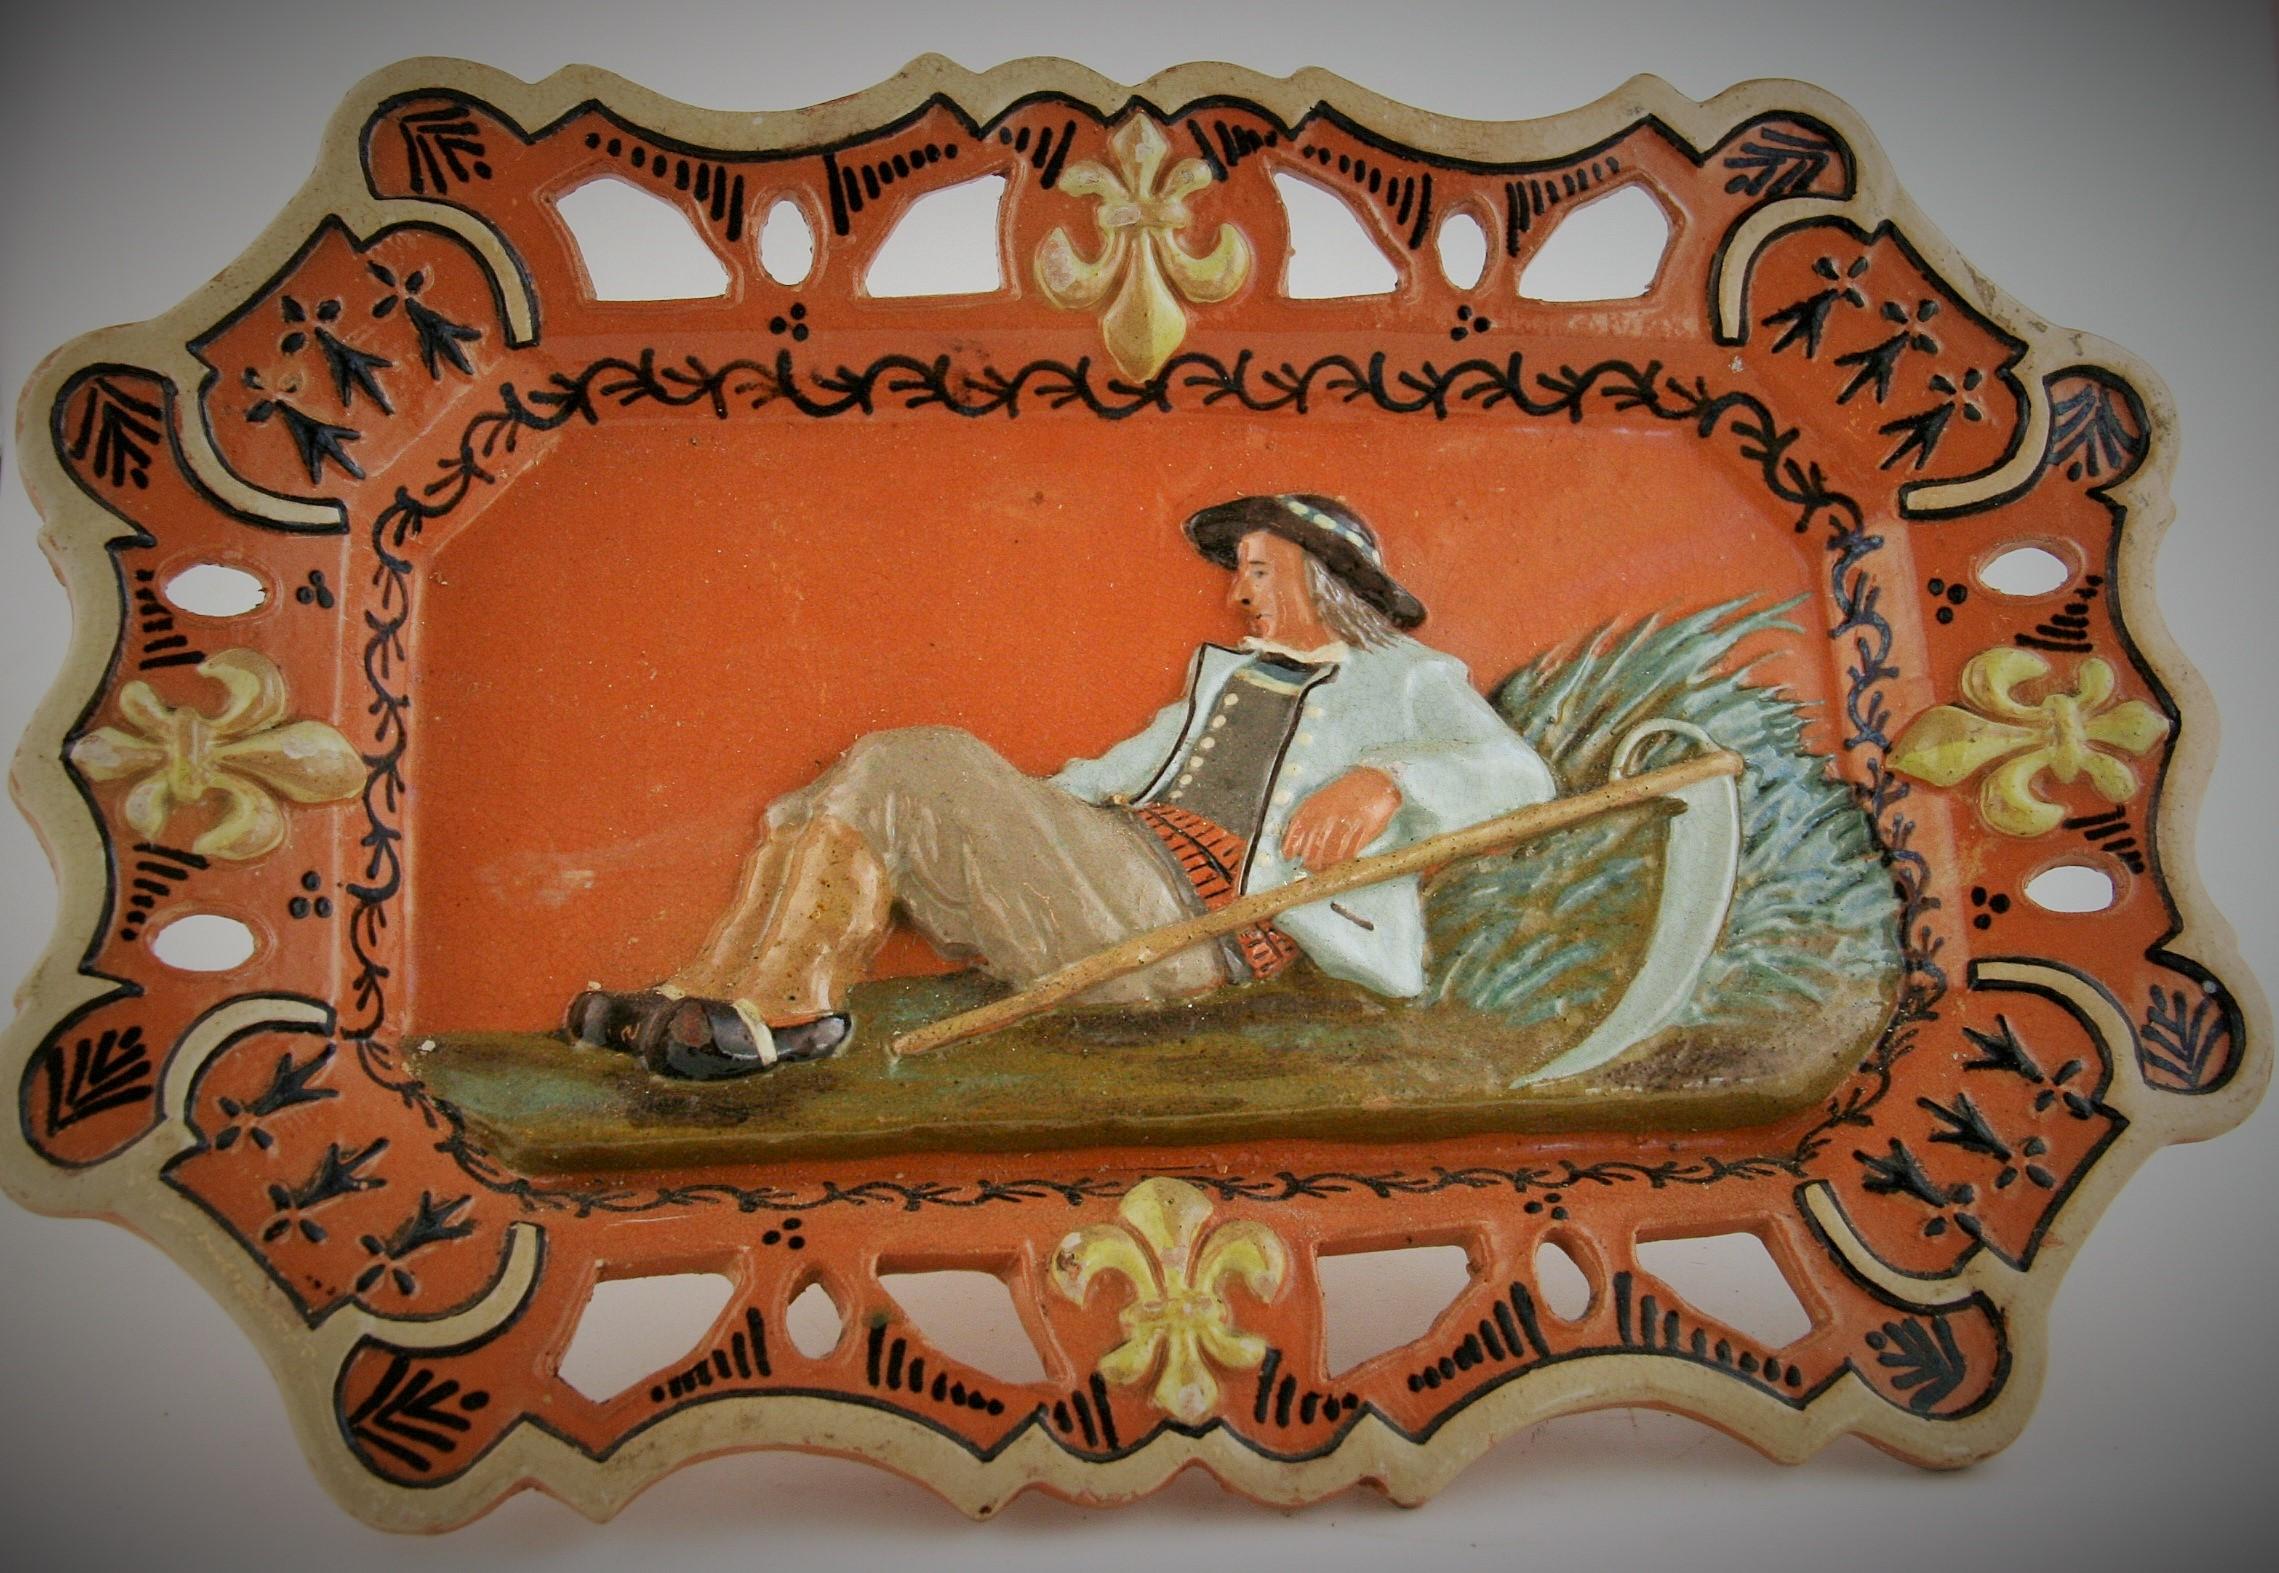 8-242 German hand painted ceramic figural country wall plaque
Old makers mark on back.